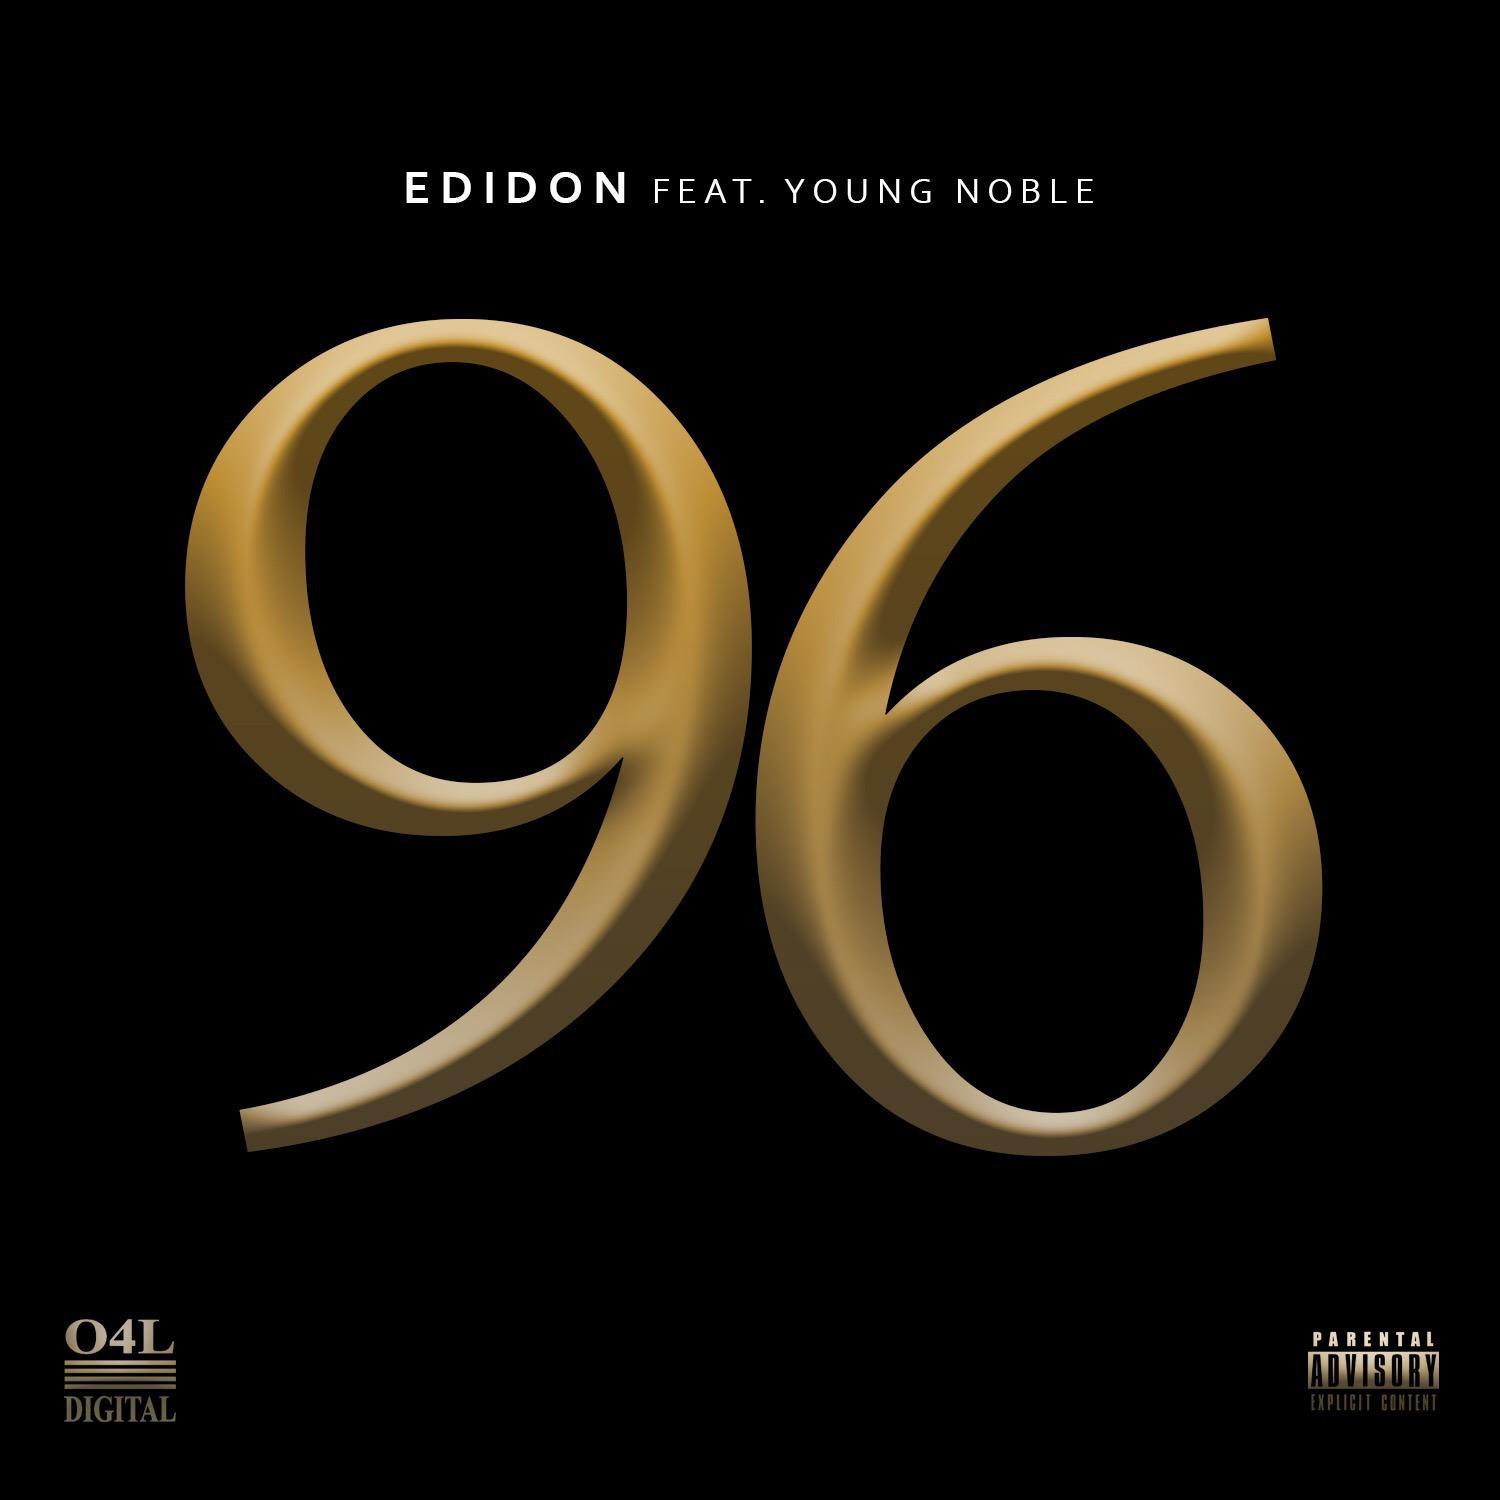 96 (feat. Young Noble)